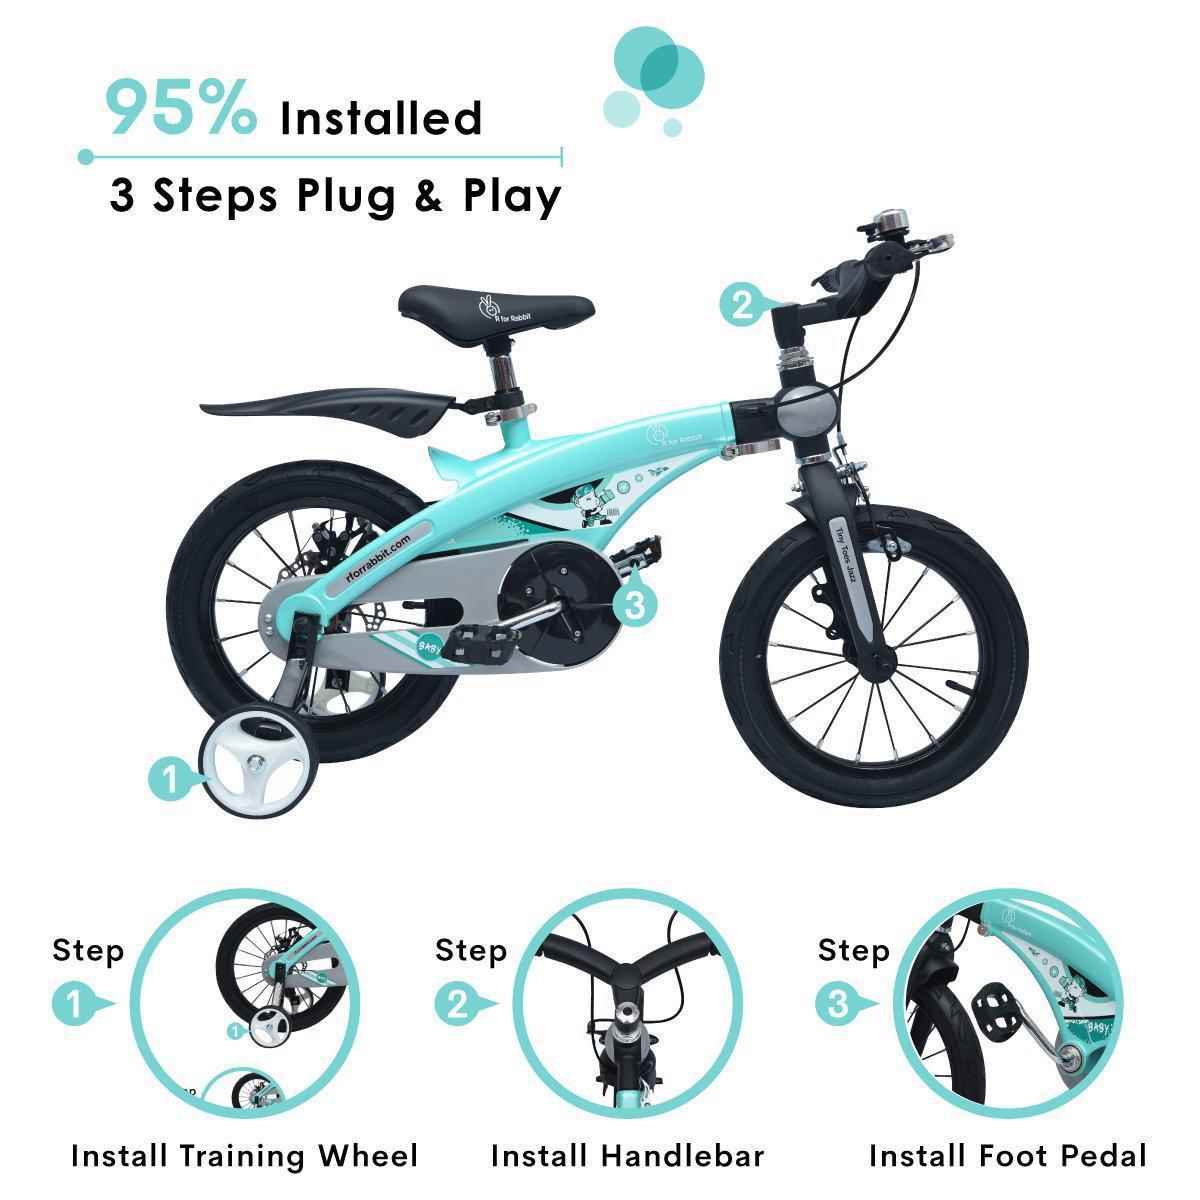 R FOR RABBIT Bicycle Tiny Toes Jazz- The Smart Plug and Play (14 inch/T - for 3-5 yrs)